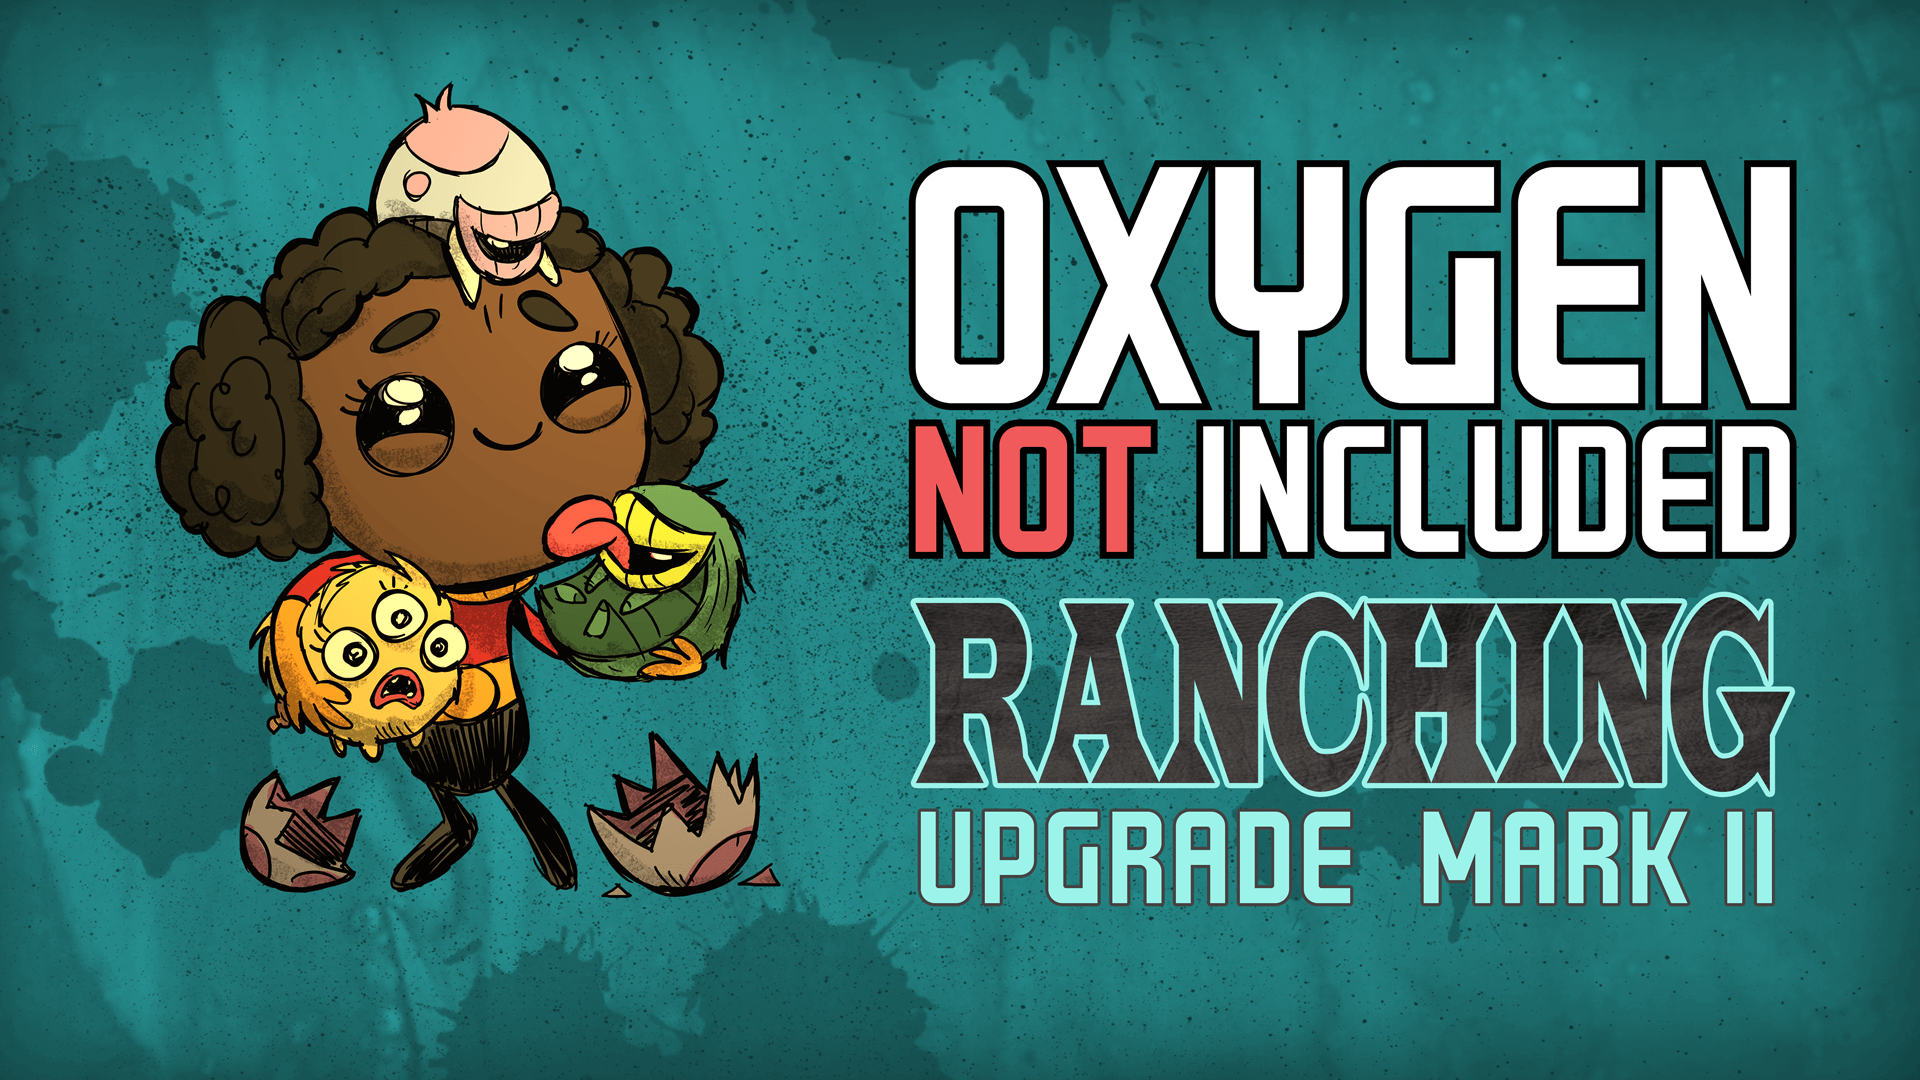 Ranching Mark II Upgrade Now! Not Included